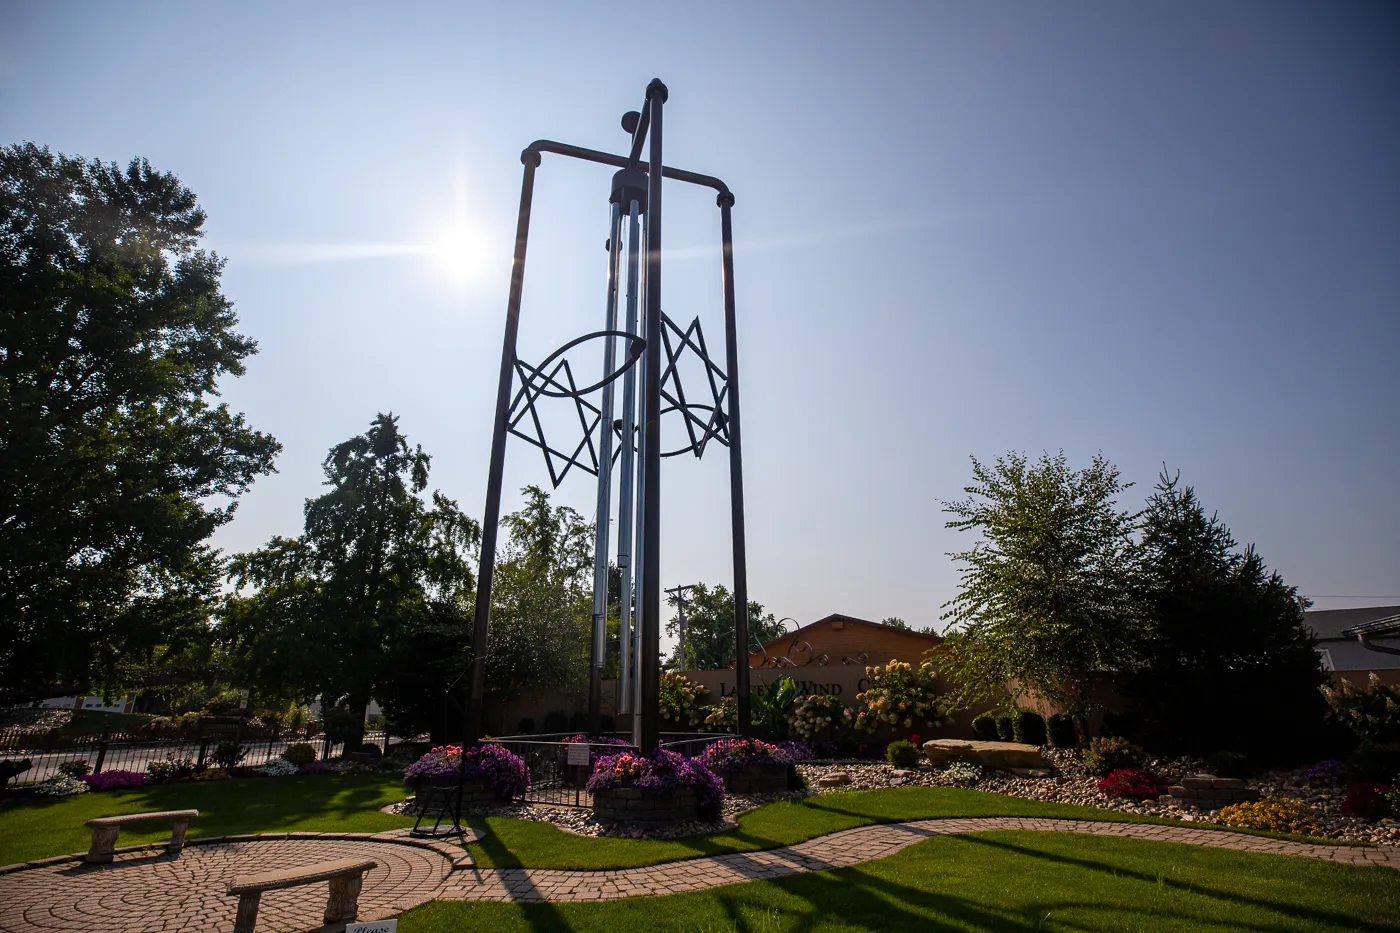 World’s Largest Wind Chime in Casey, Illinois Roadside Attraction